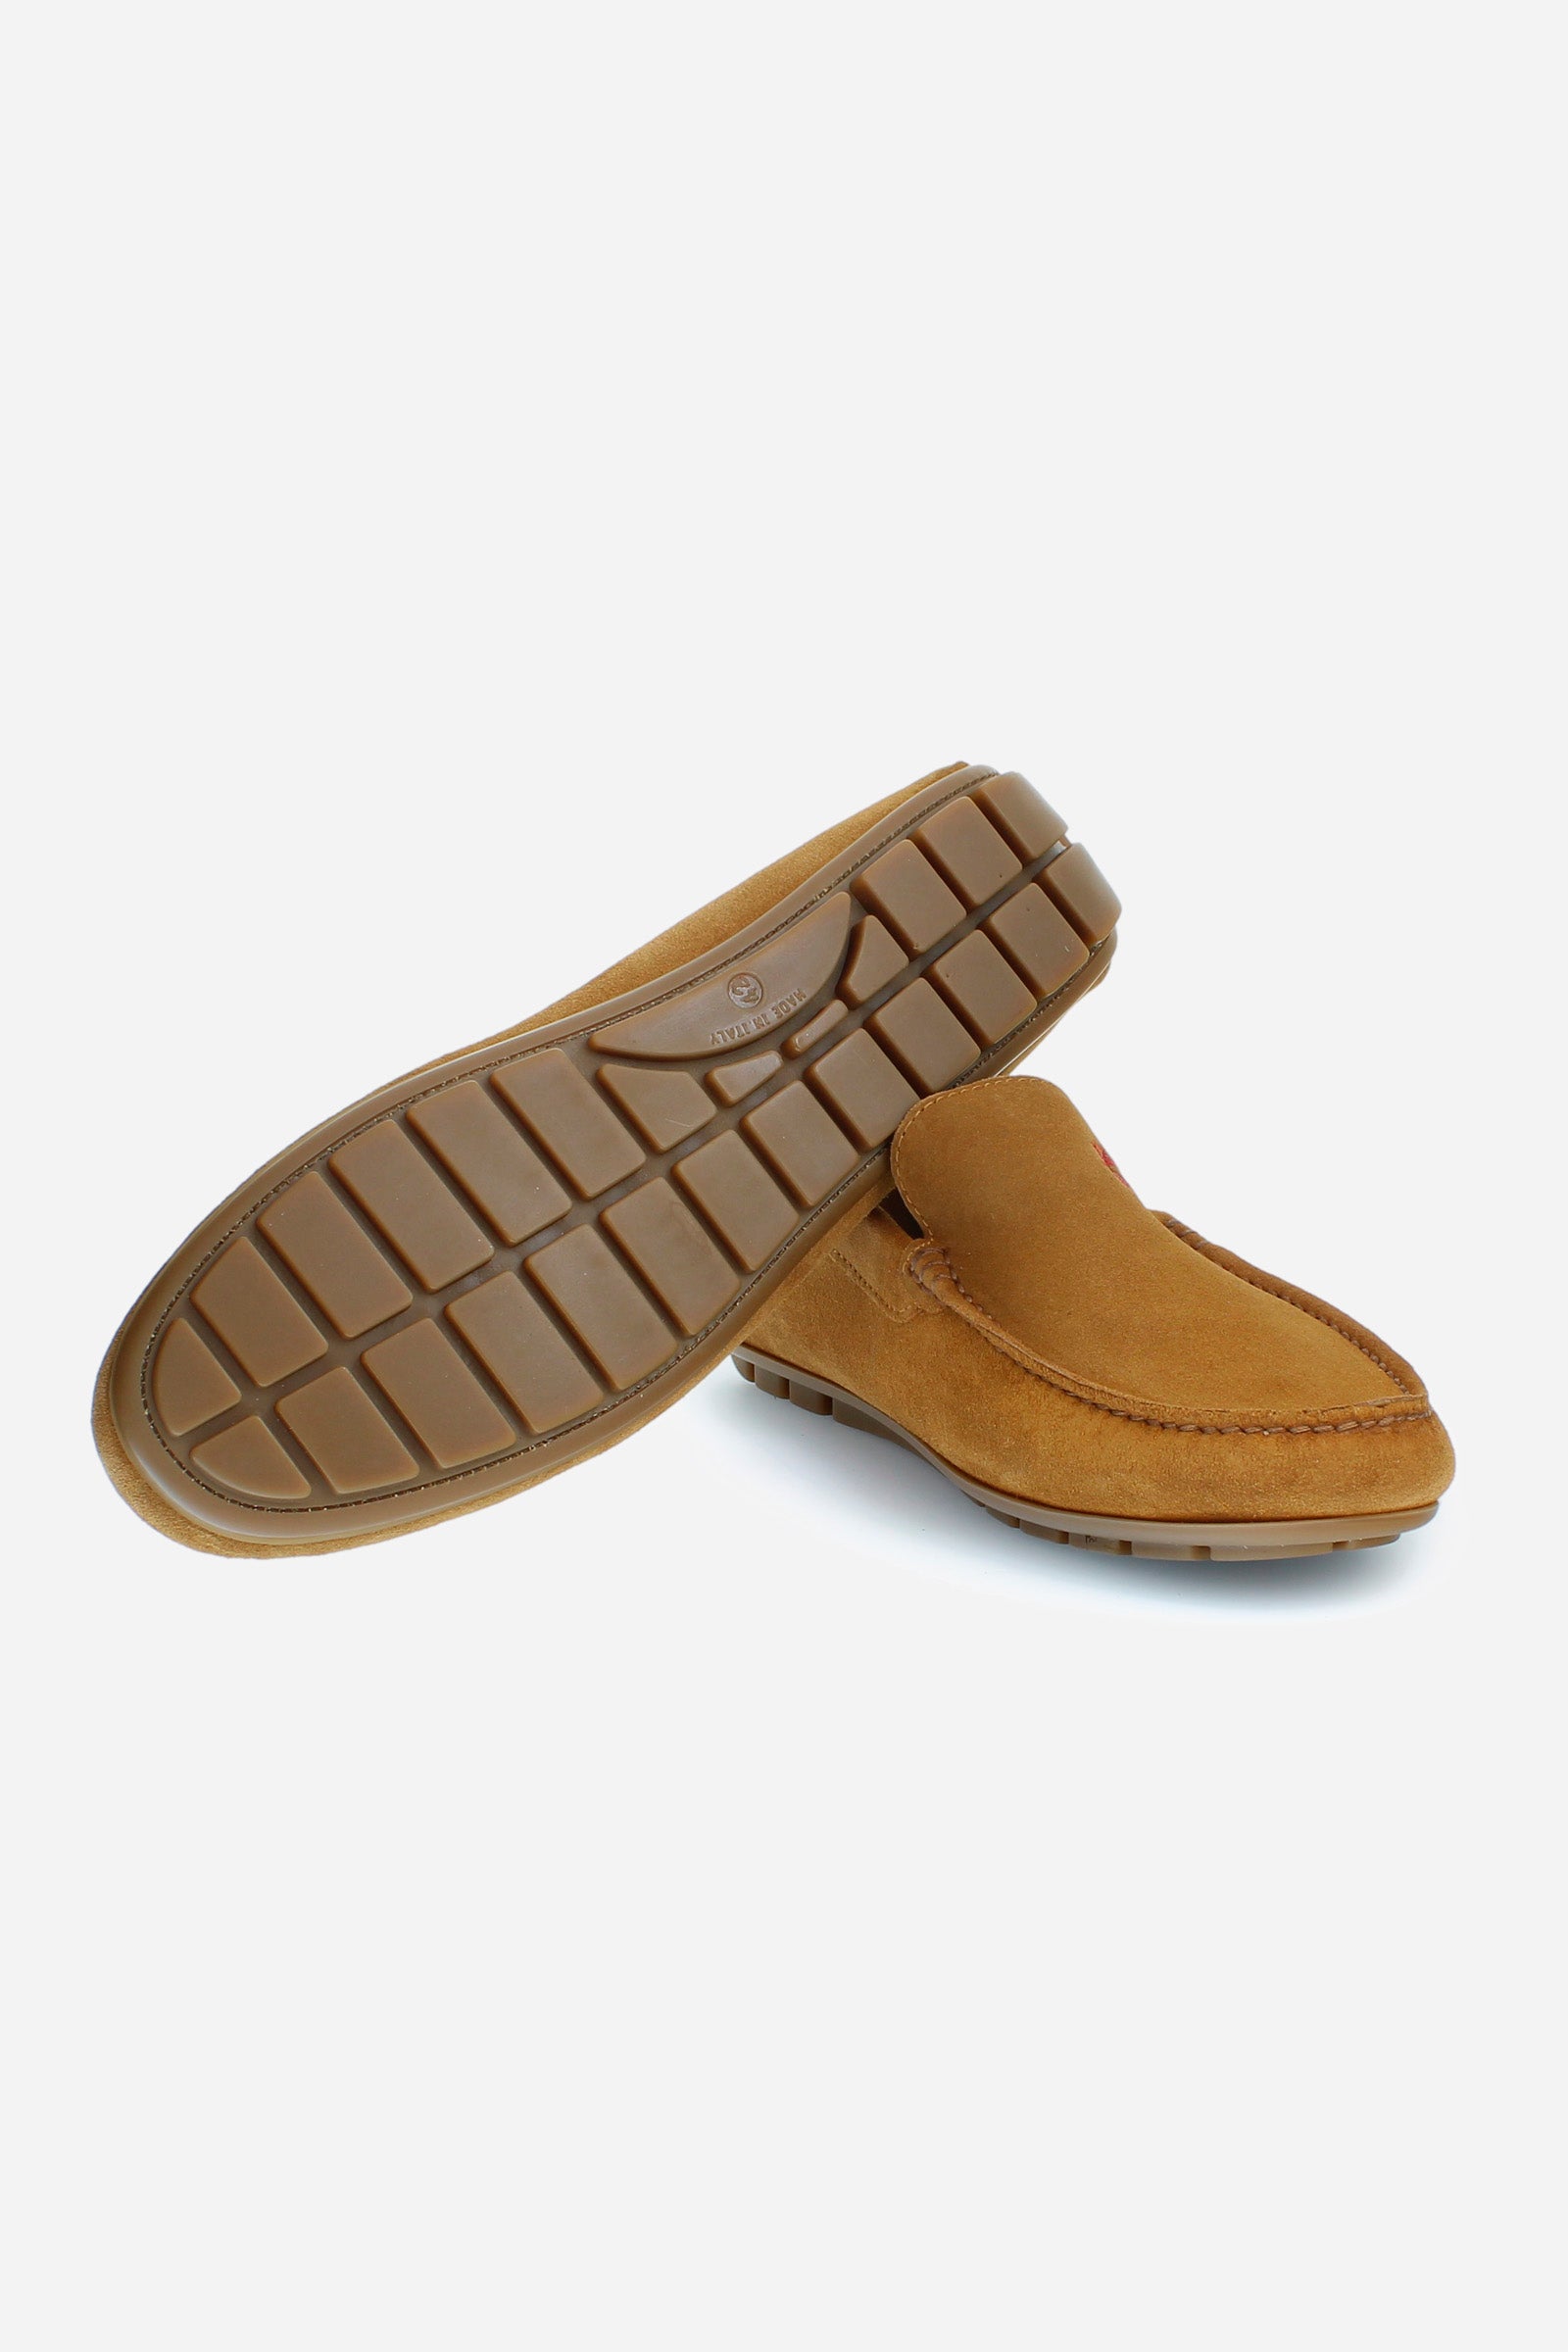 Men's suede loafers